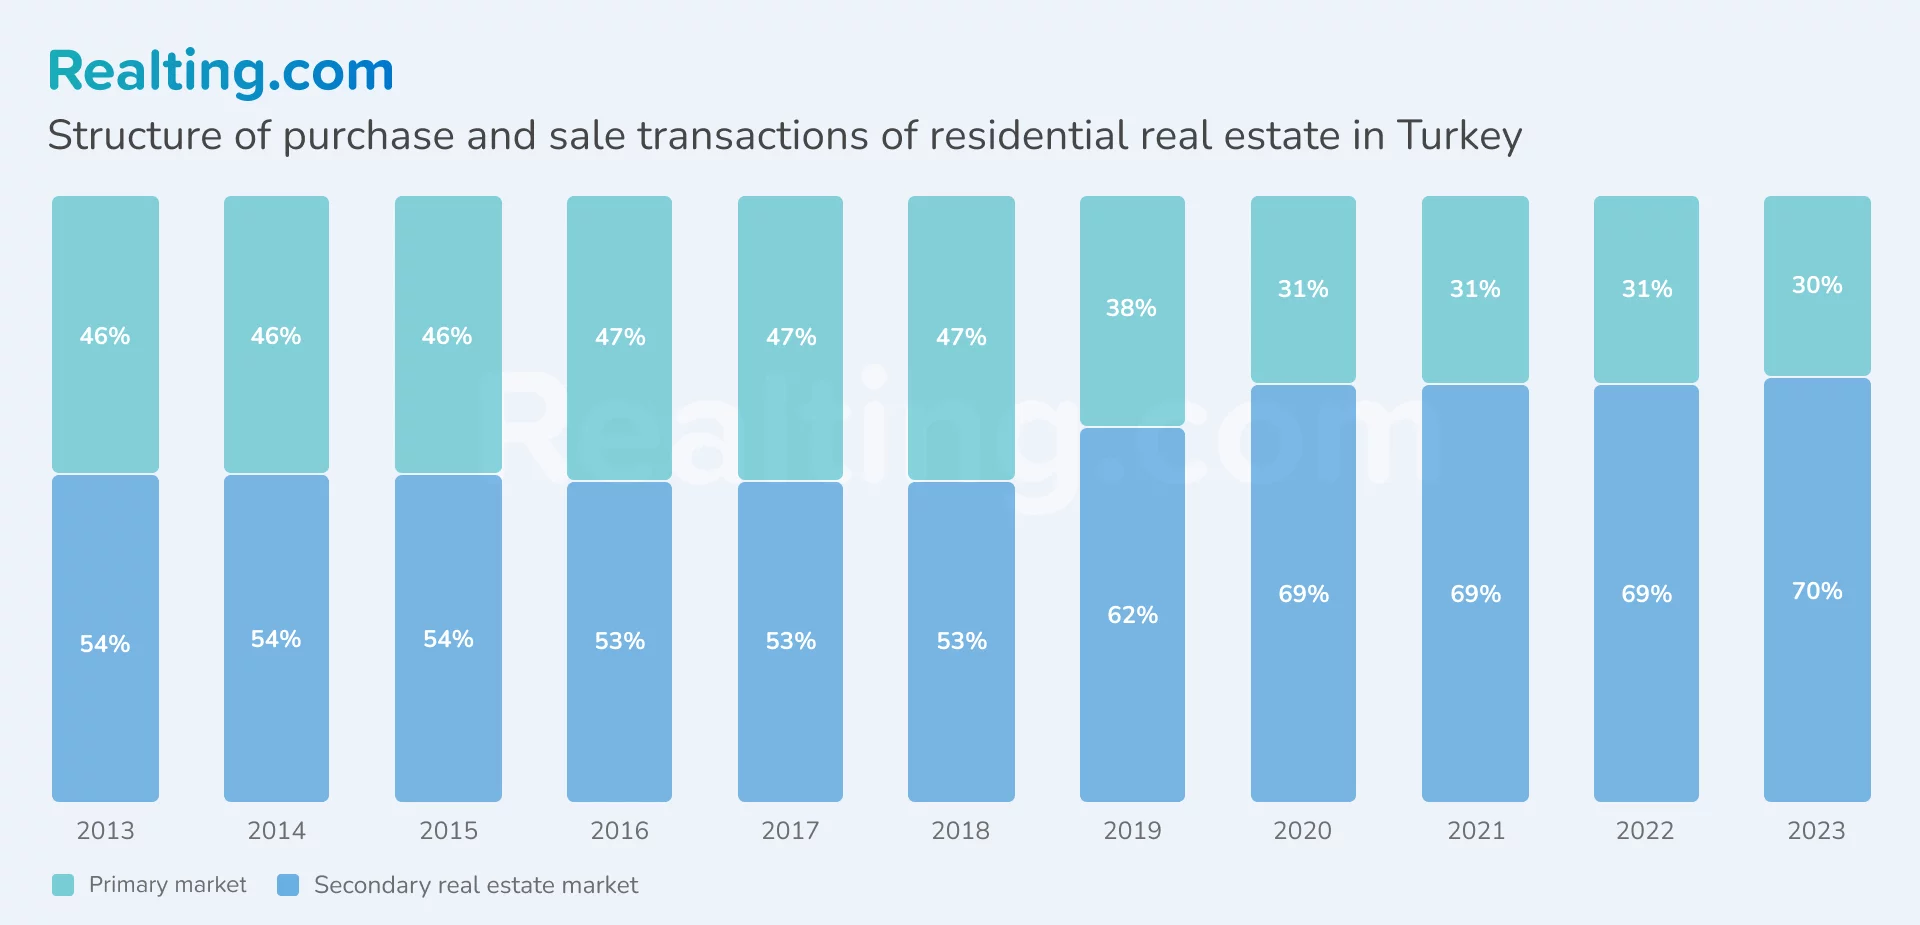 Structure of residential real estate purchase and sale transactions in Turkey